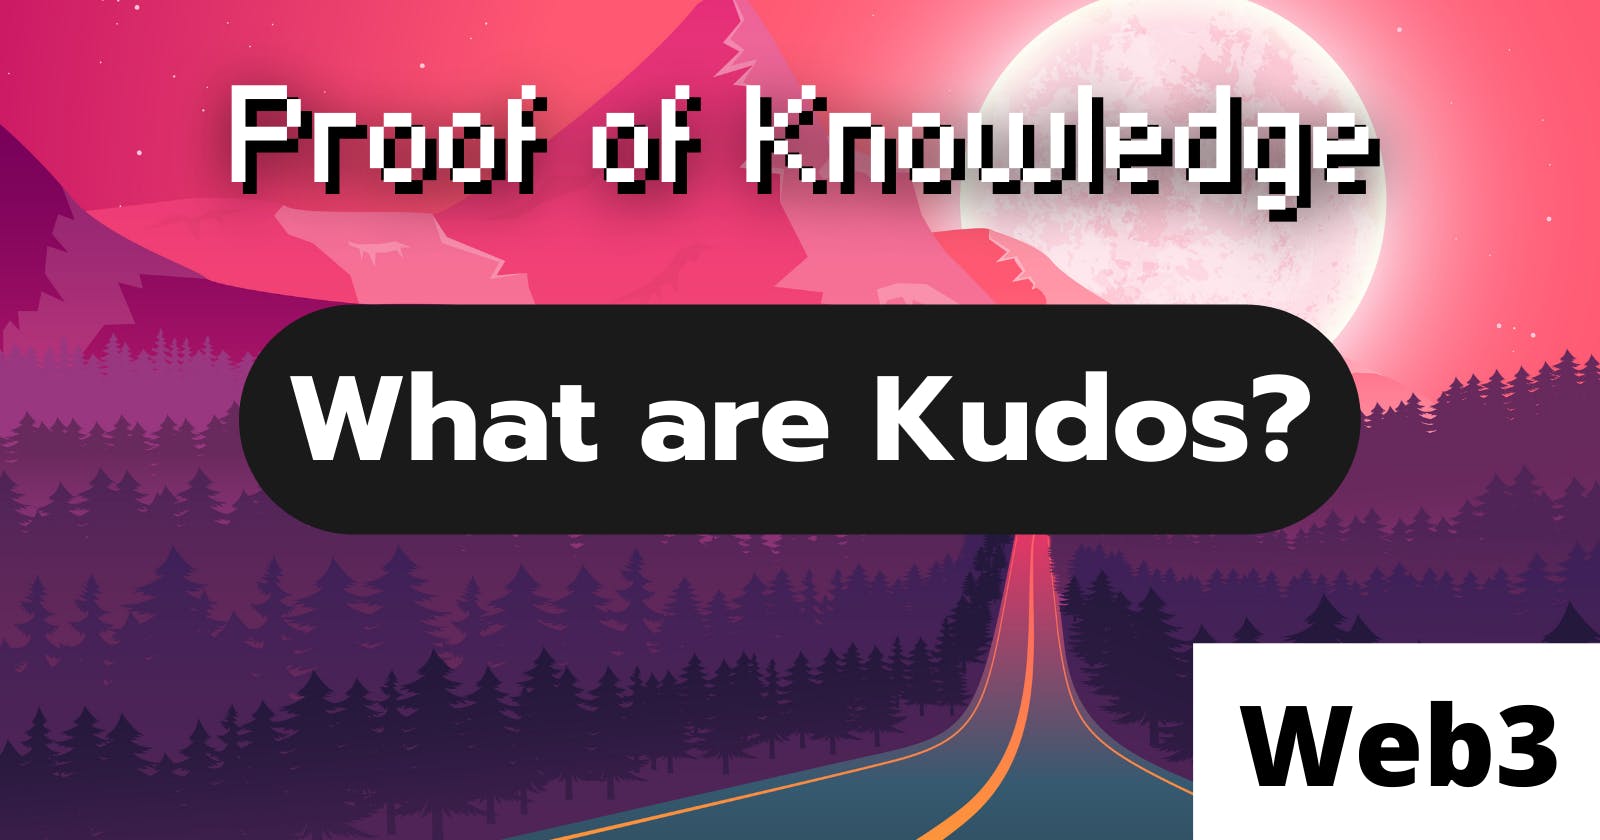 Proof of Knowledge: Let's talk about Kudos!